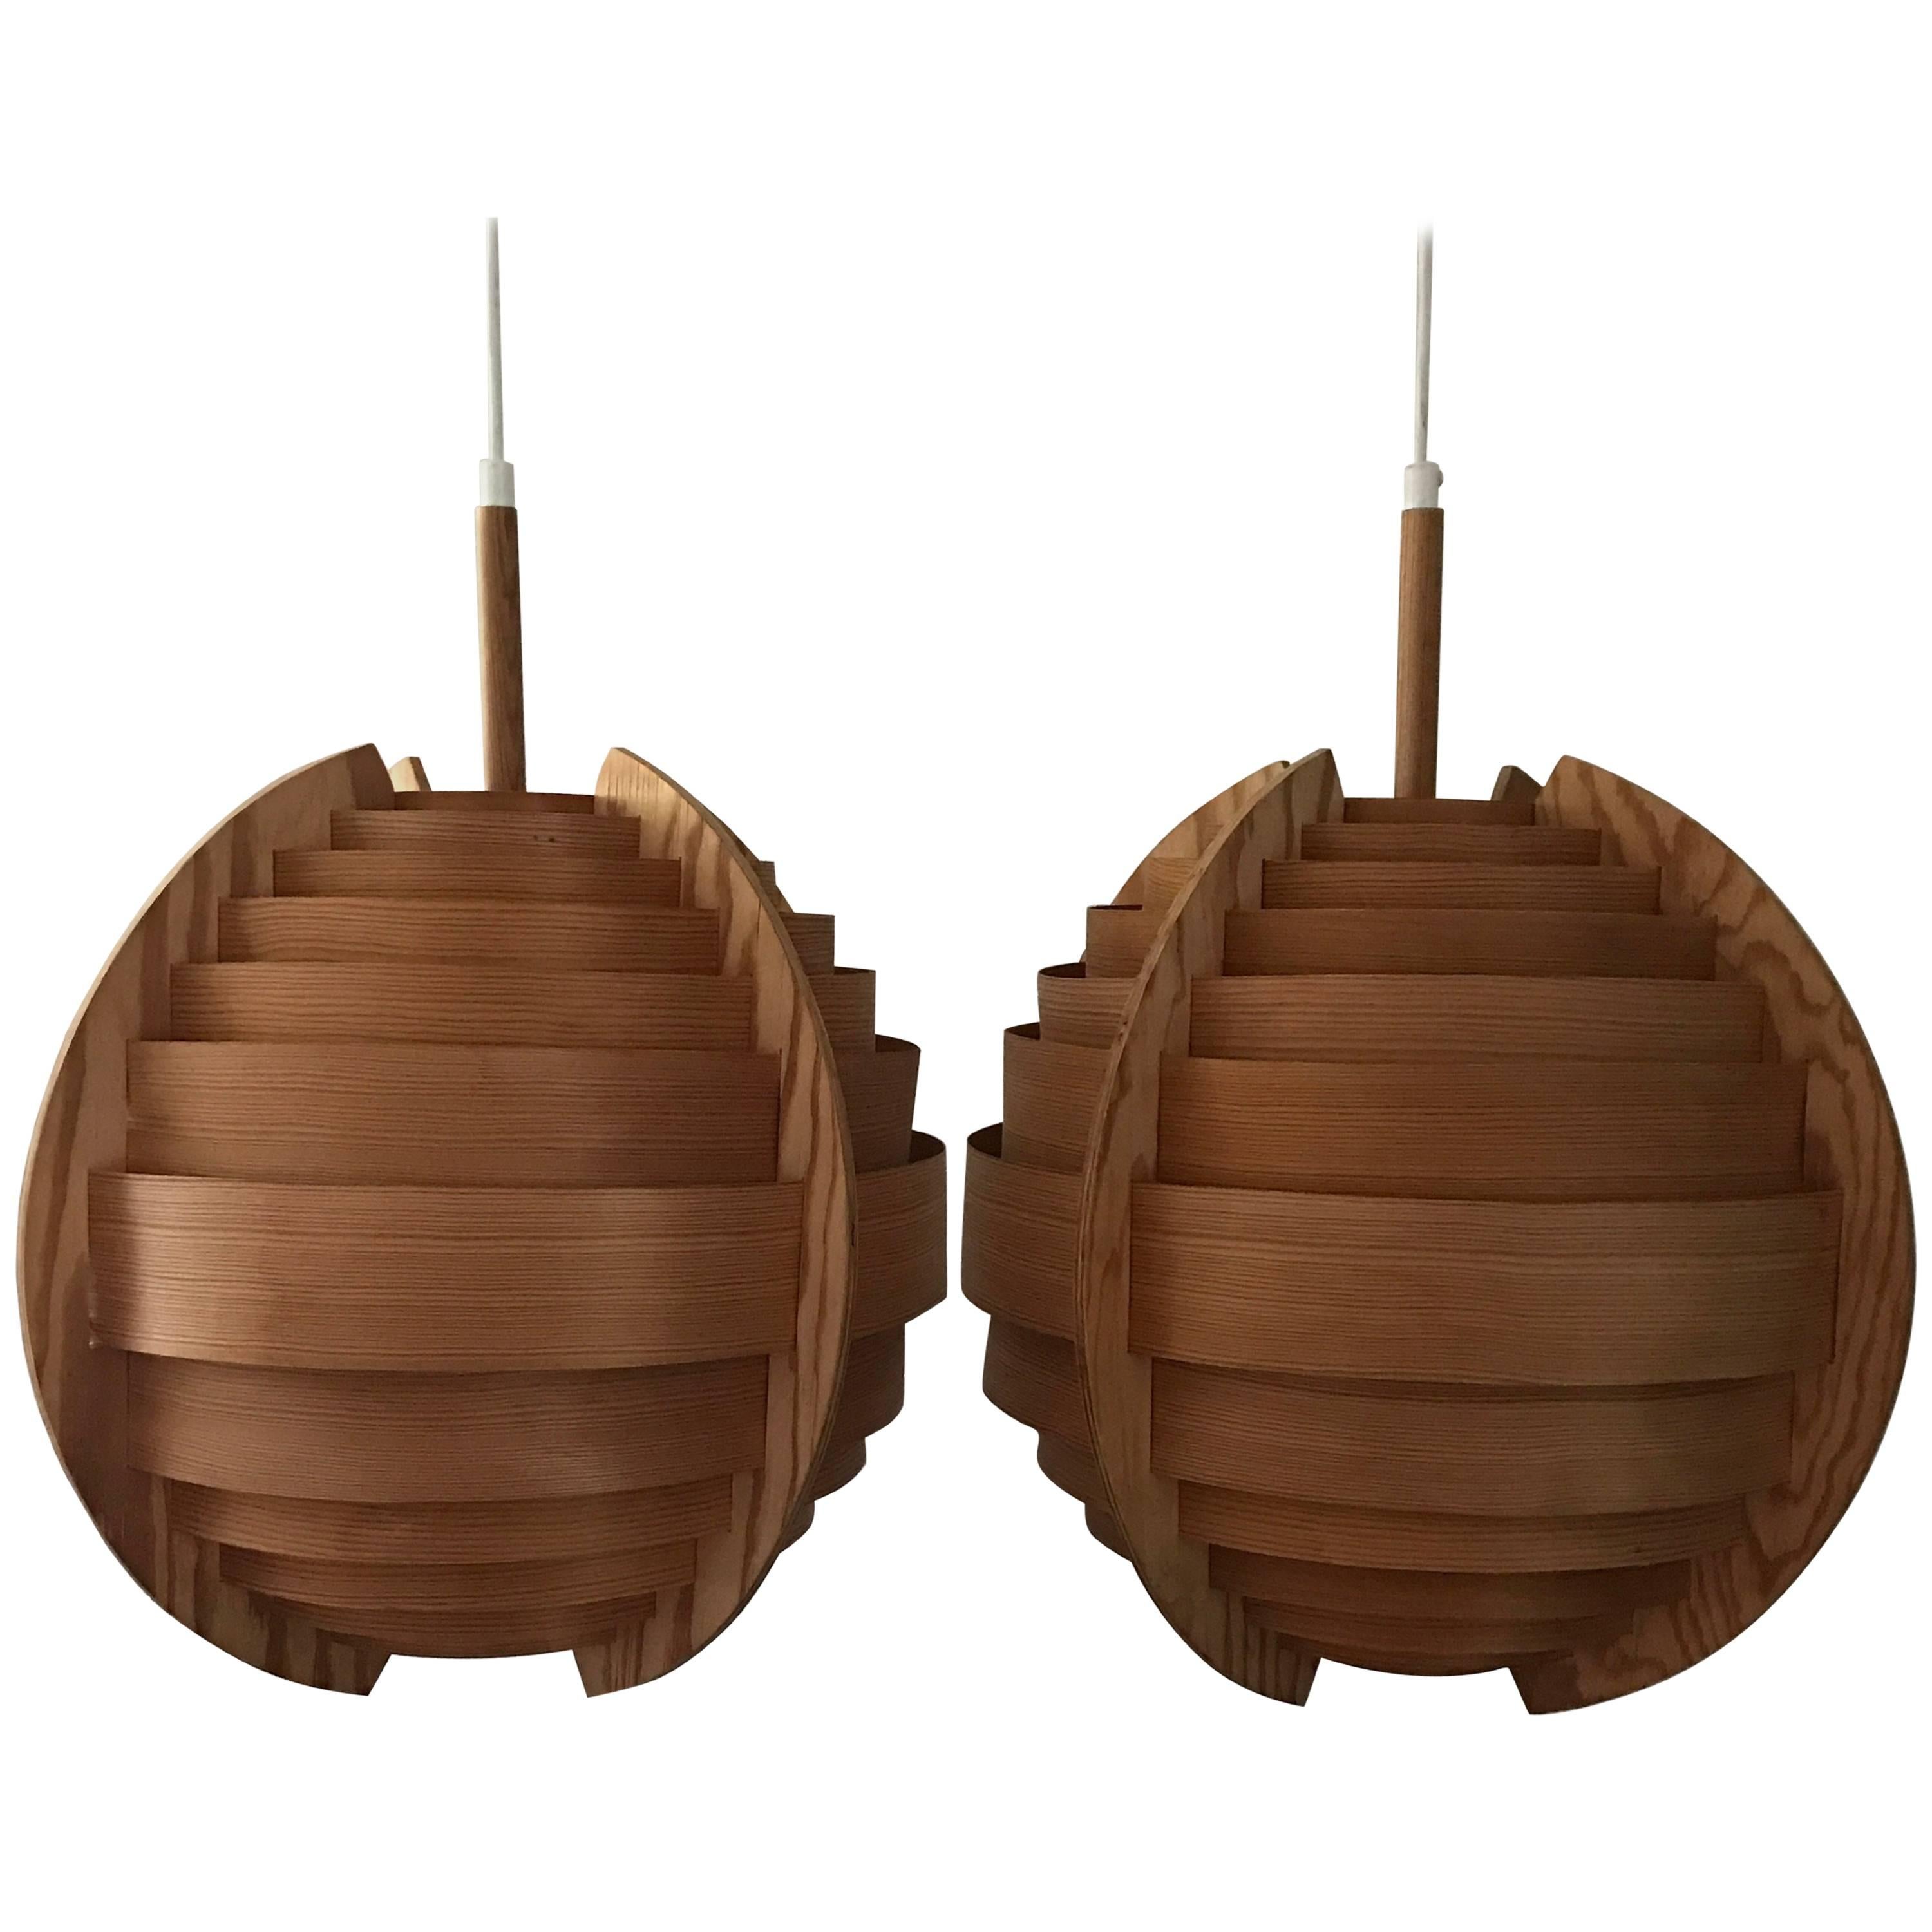 1965 Hans-Agne Jakobsson ellysett spherical lamp made of pine extremely rare two available.
Absolutely magnificent lamps of thin laminated pine tree wood in a spherical shape designed by Swedish Hans-Agne Jakobsson in the mid-1960s.
The glowing